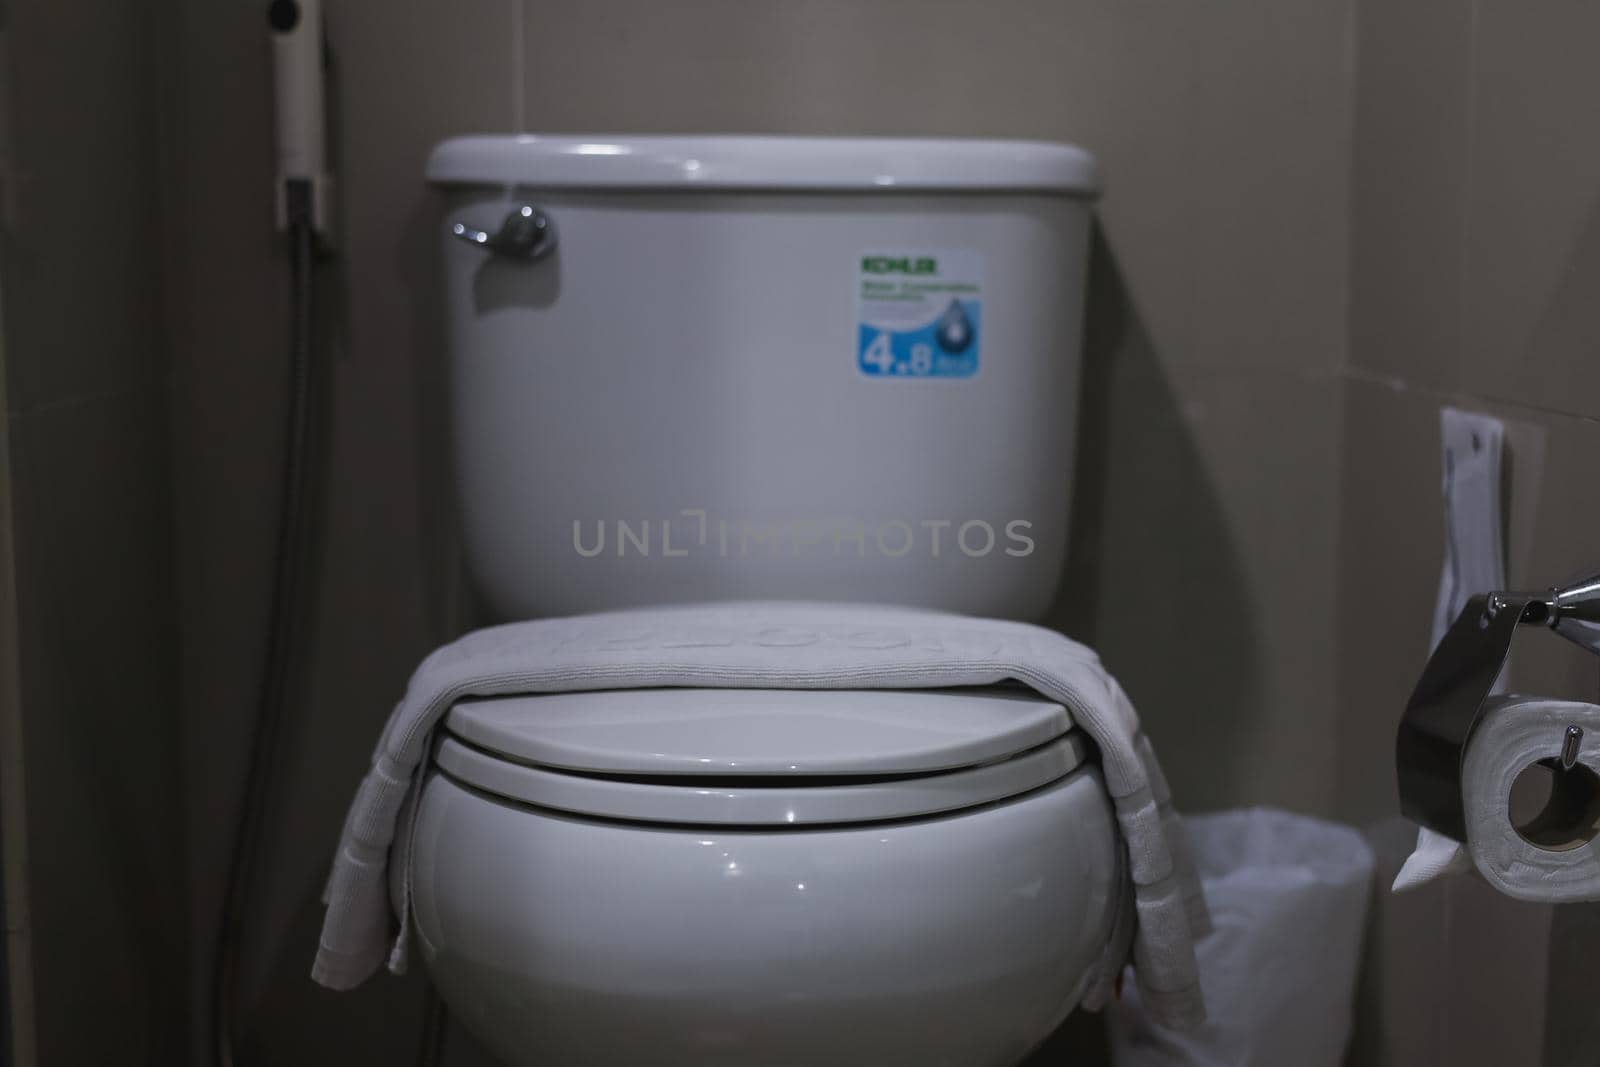 Clean toilets are prepared for customers inside the hotel.